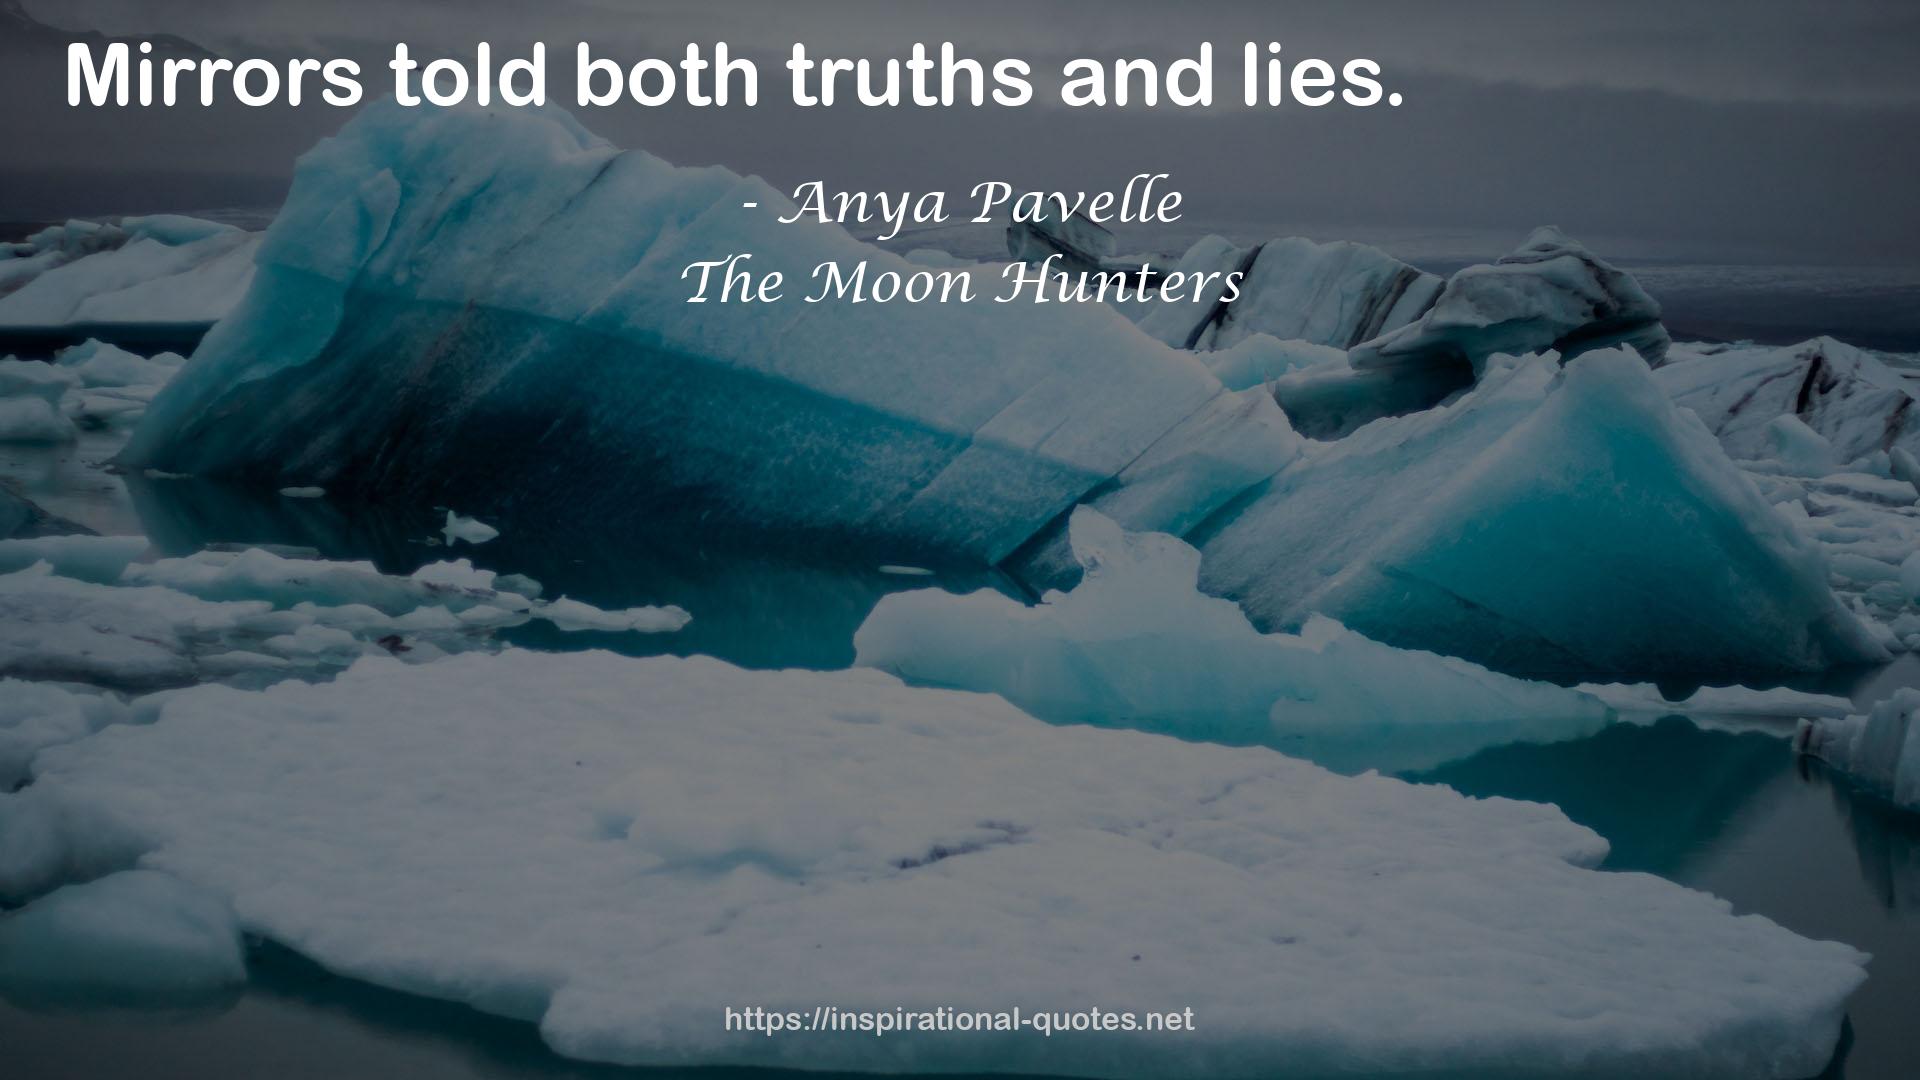 Anya Pavelle QUOTES